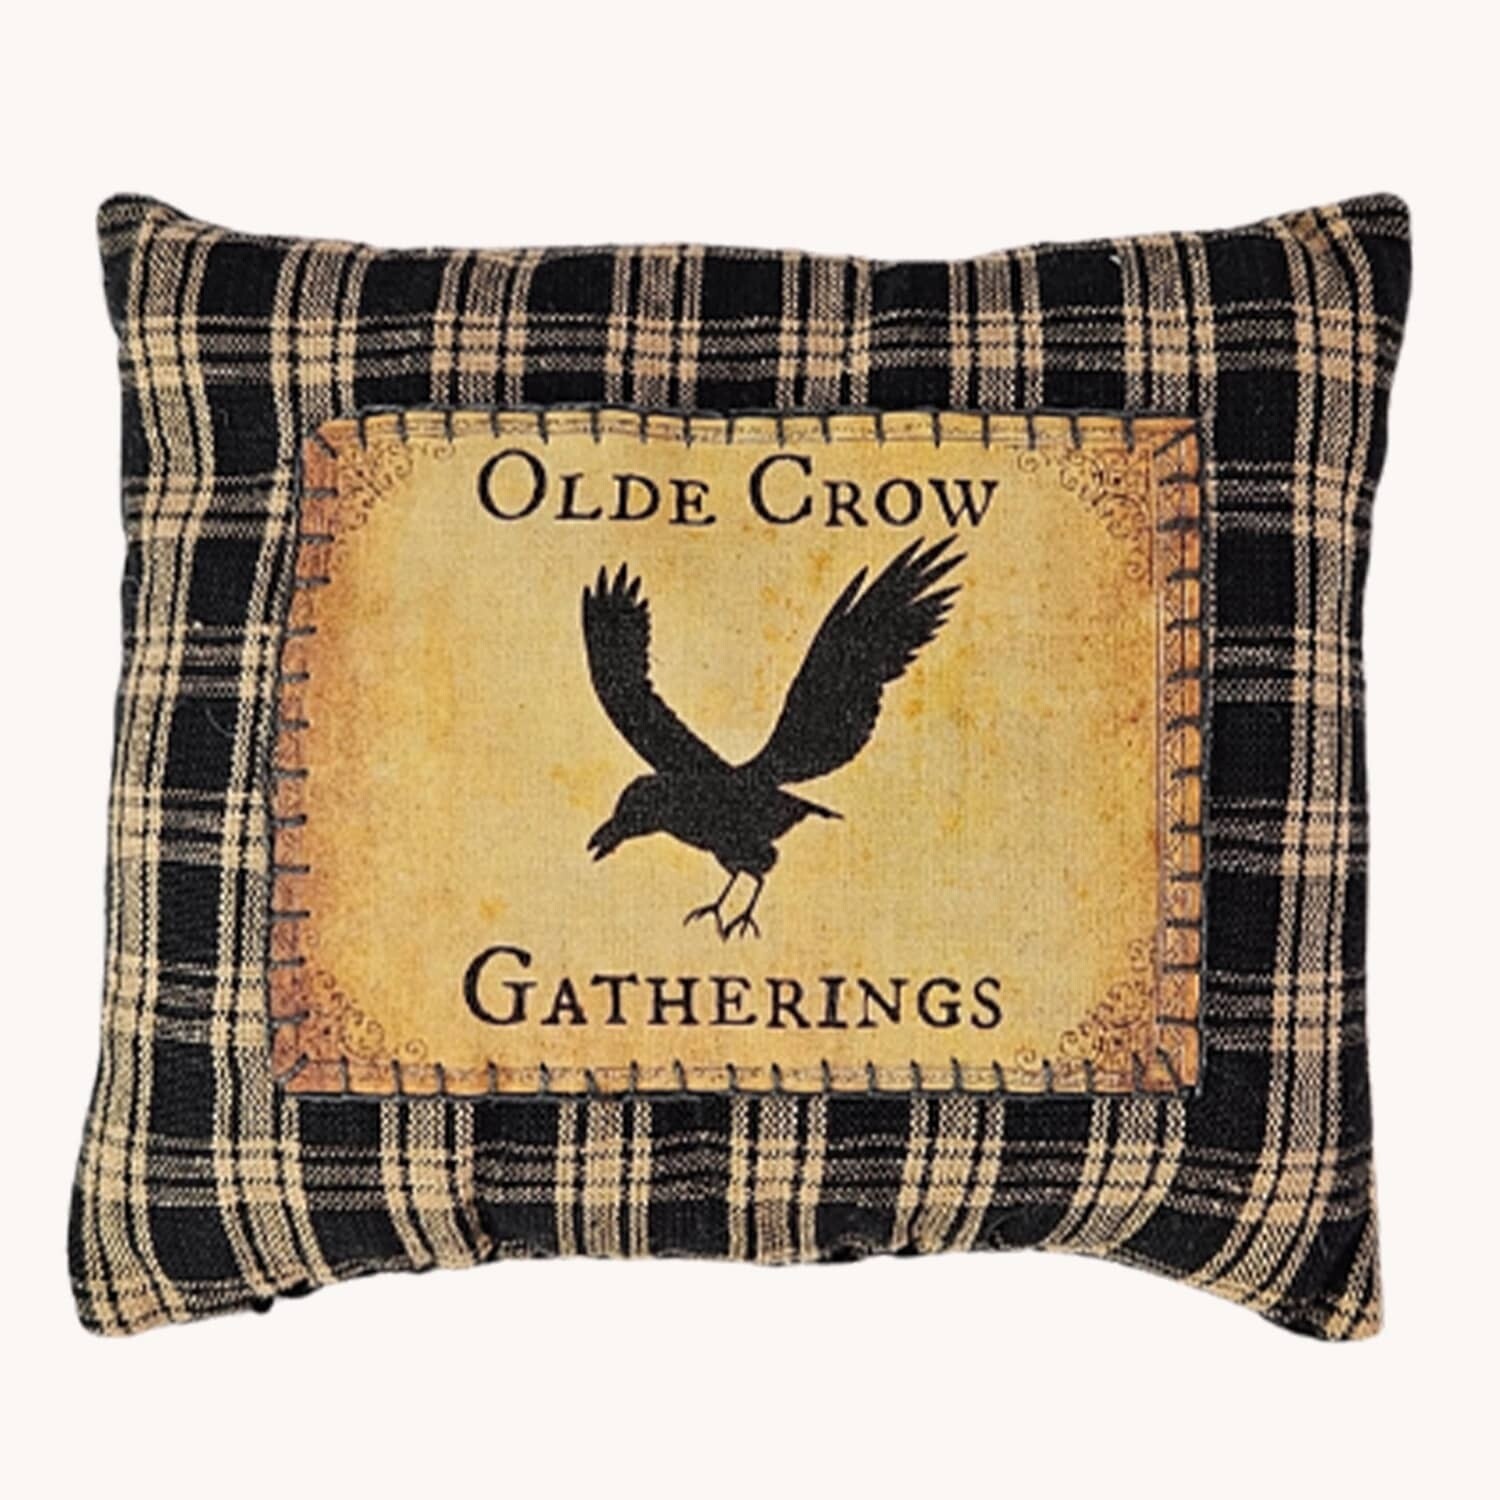 Olde Fashioned Christmas Bowl Filler Pillow